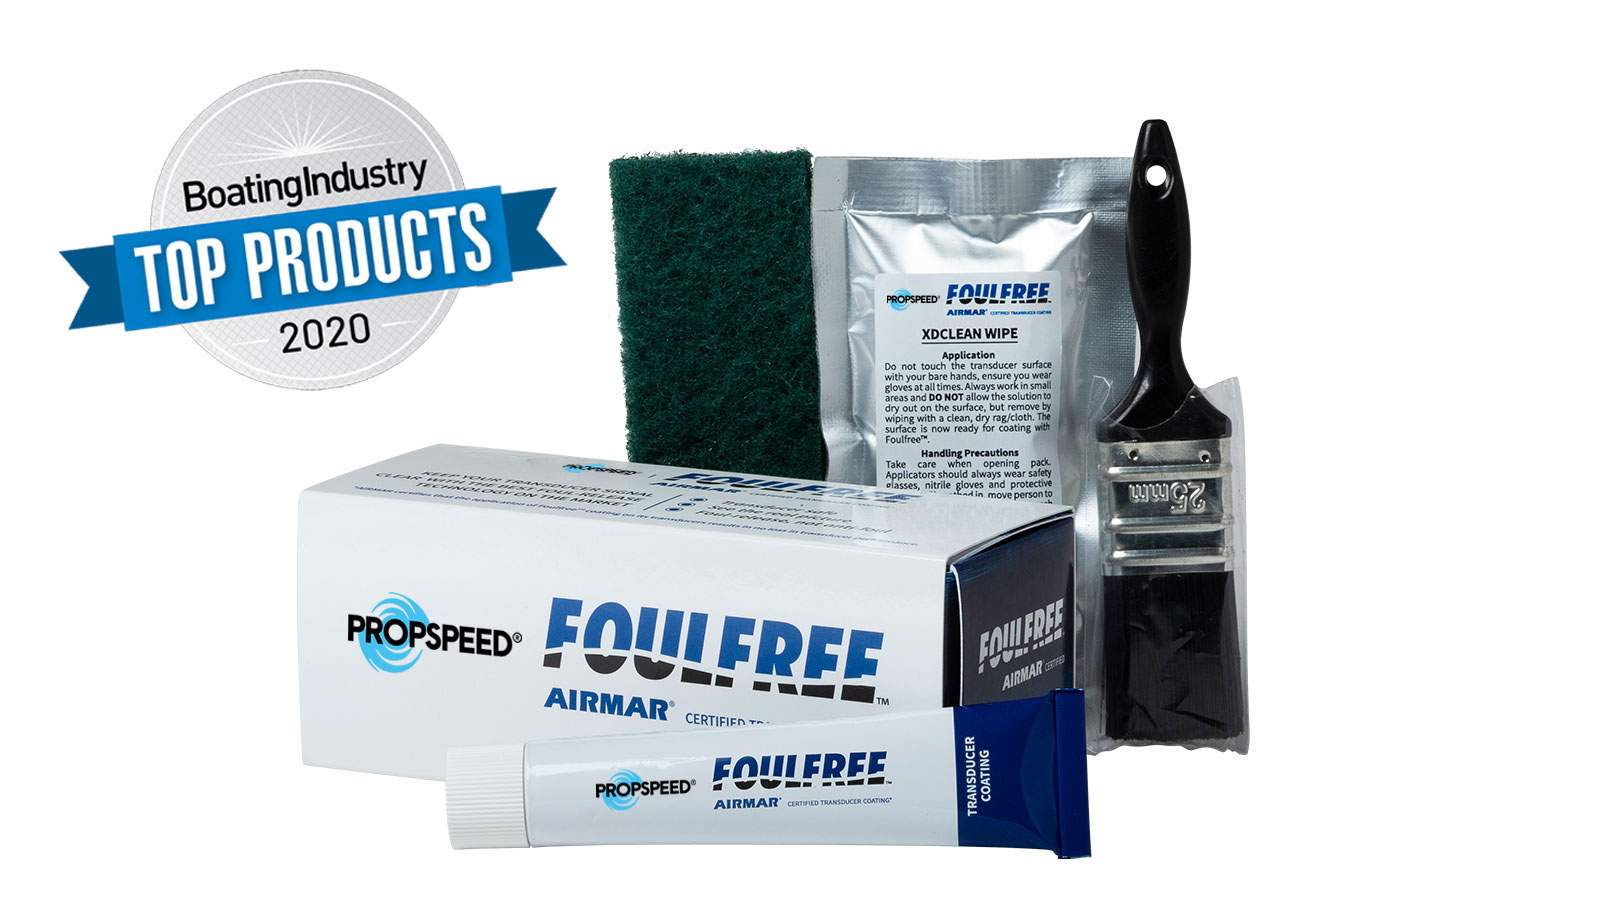 Foulfree kit pictured with Boating Industry Top Products 2020 sticker